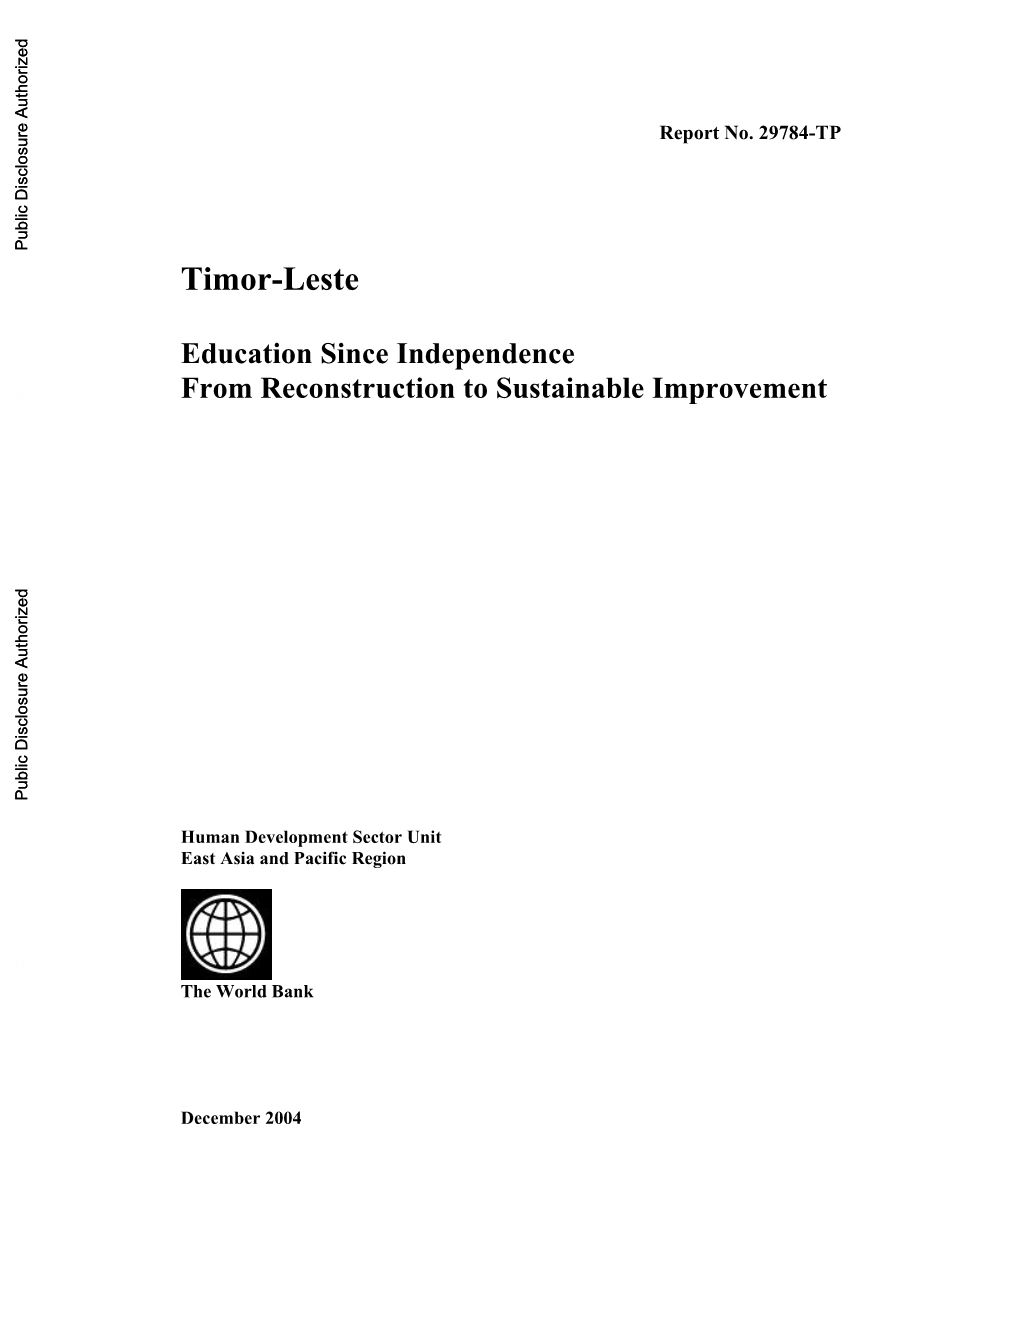 Timor-Leste Education Since Independence from Reconstruction to Sustainable Improvement